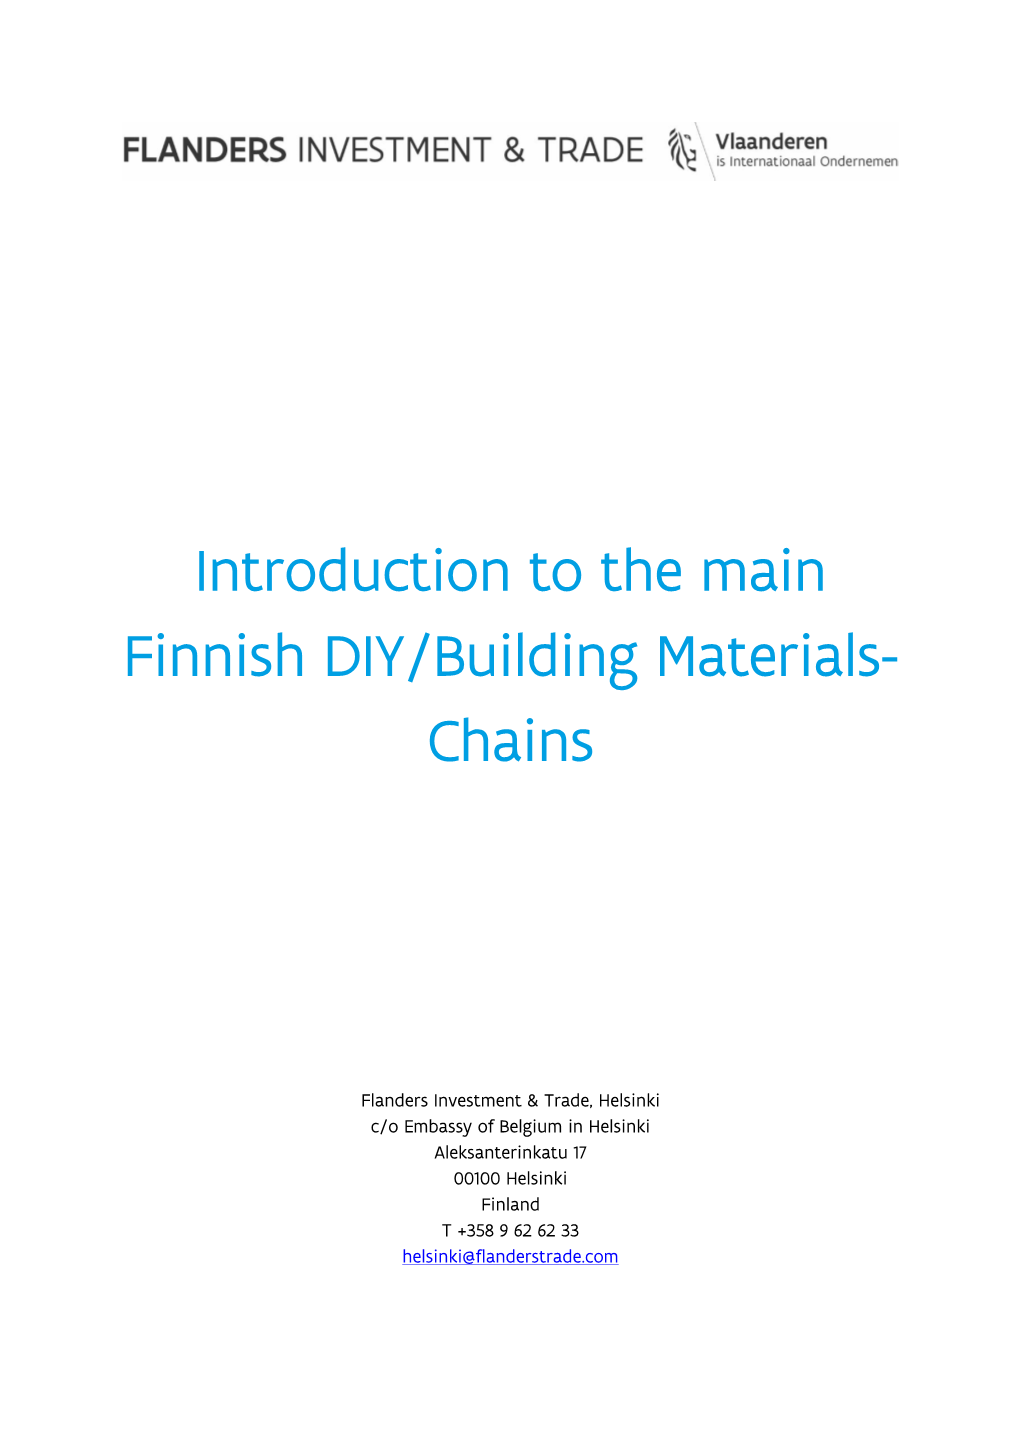 Introduction to the Main Finnish DIY/Building Materials- Chains